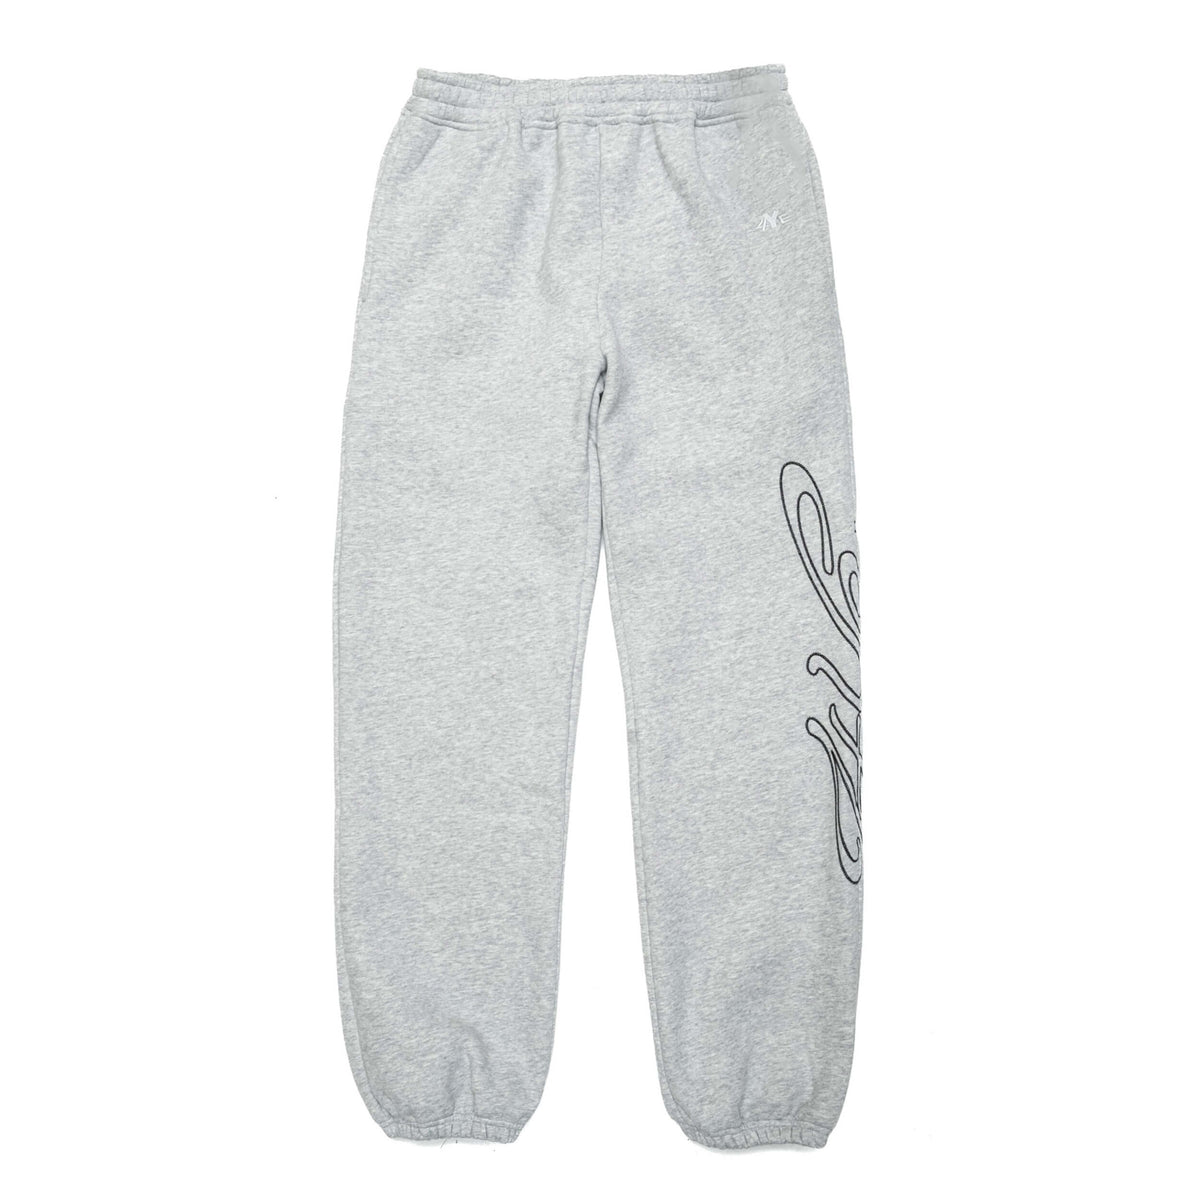 Front view of 4YE signature logo cuff pant in grey, showing cuff bottom and 4YE logo detailing on left upper and lower leg.